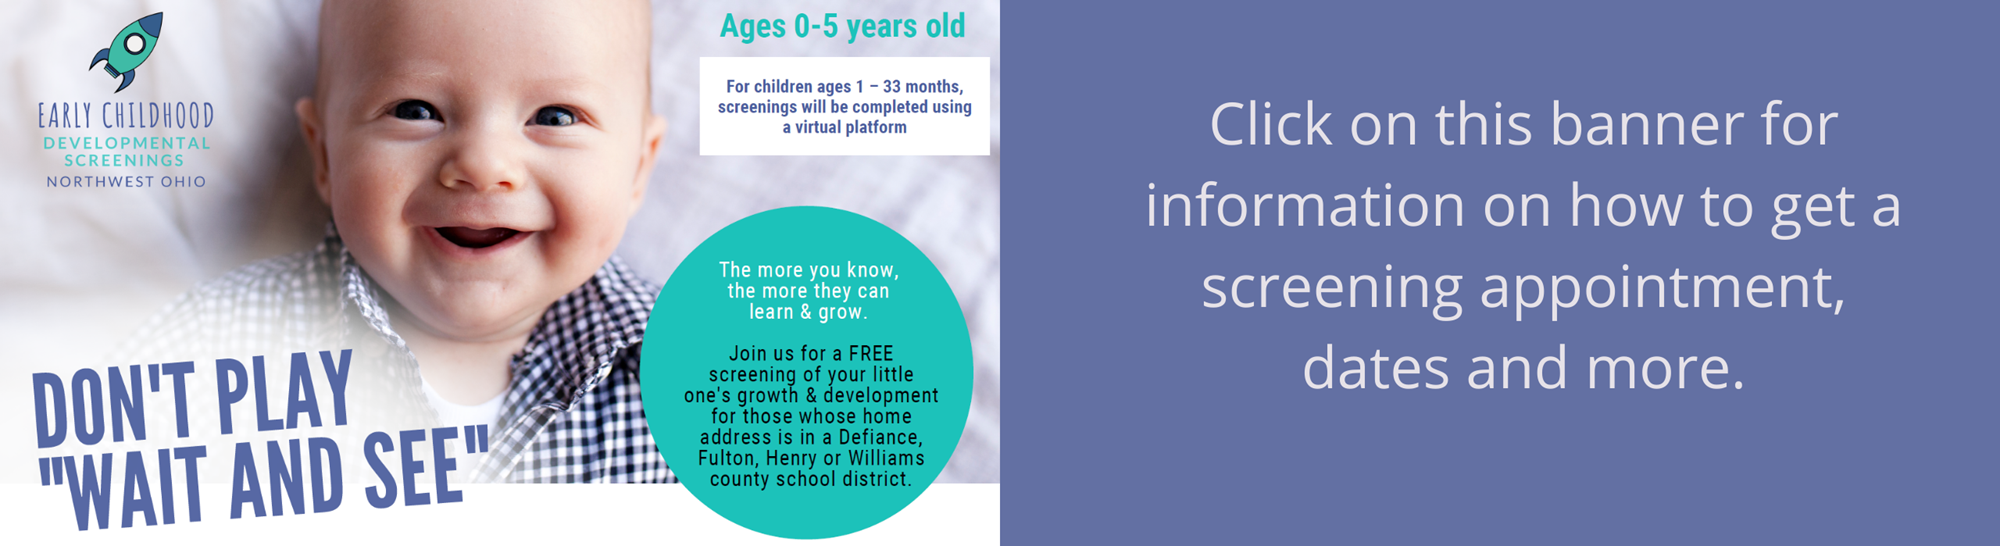 Early Childhood Screenings - click